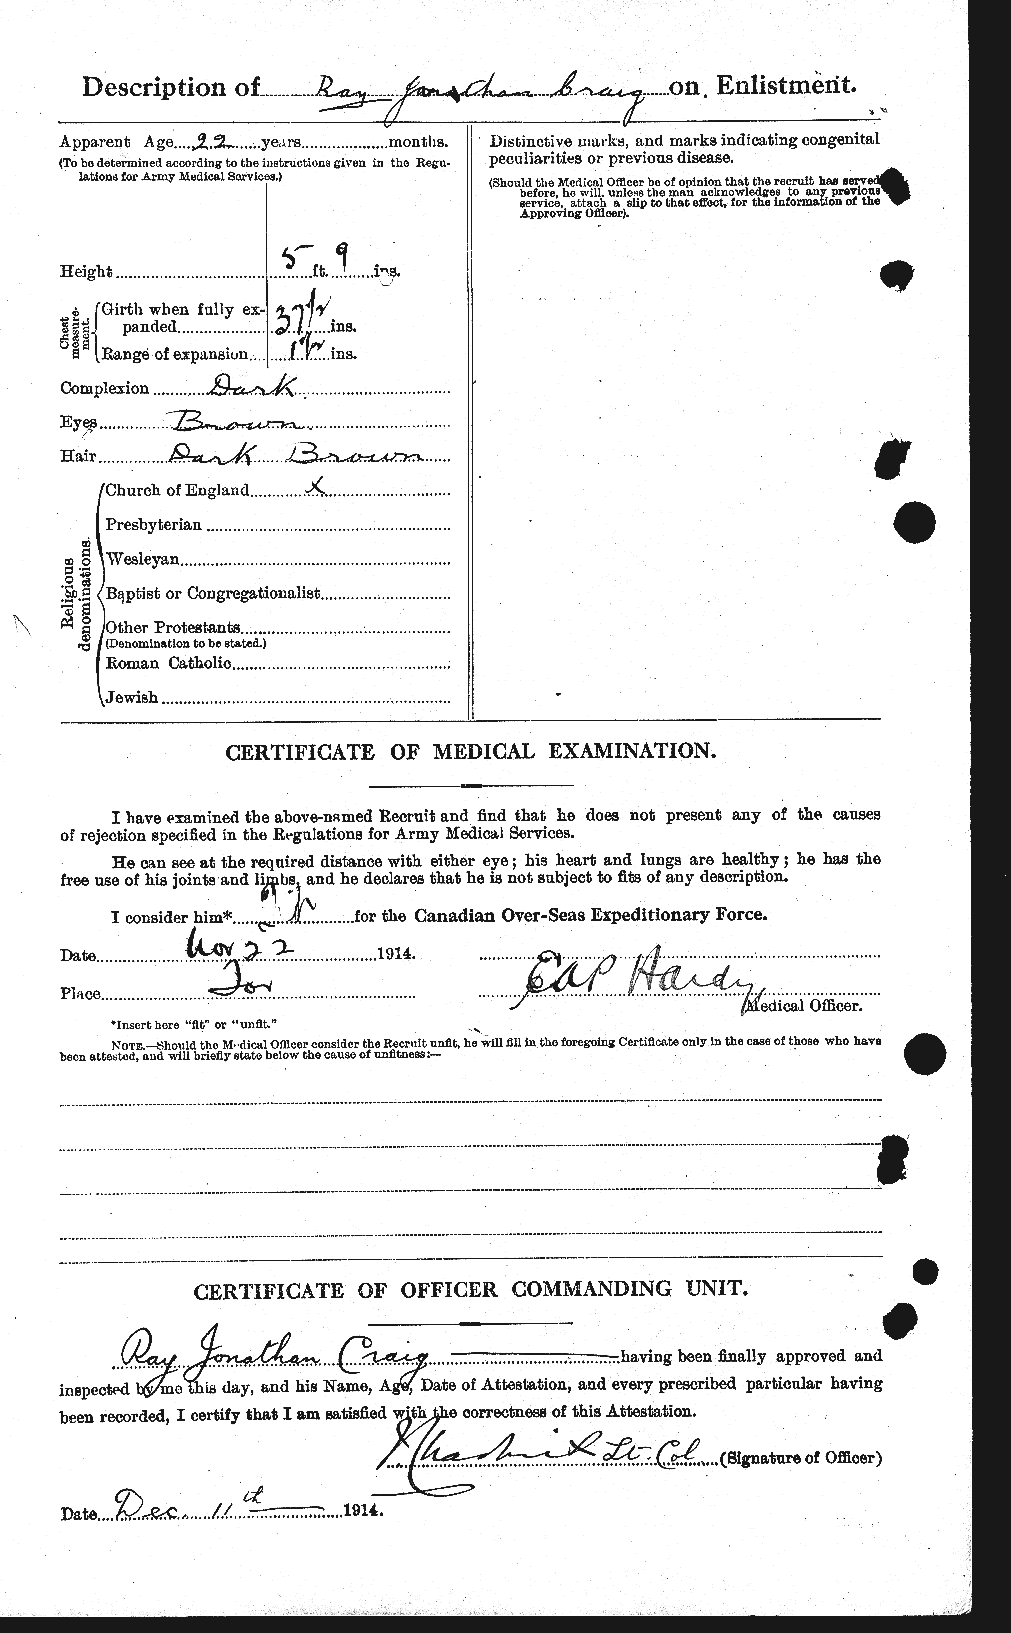 Personnel Records of the First World War - CEF 060773b